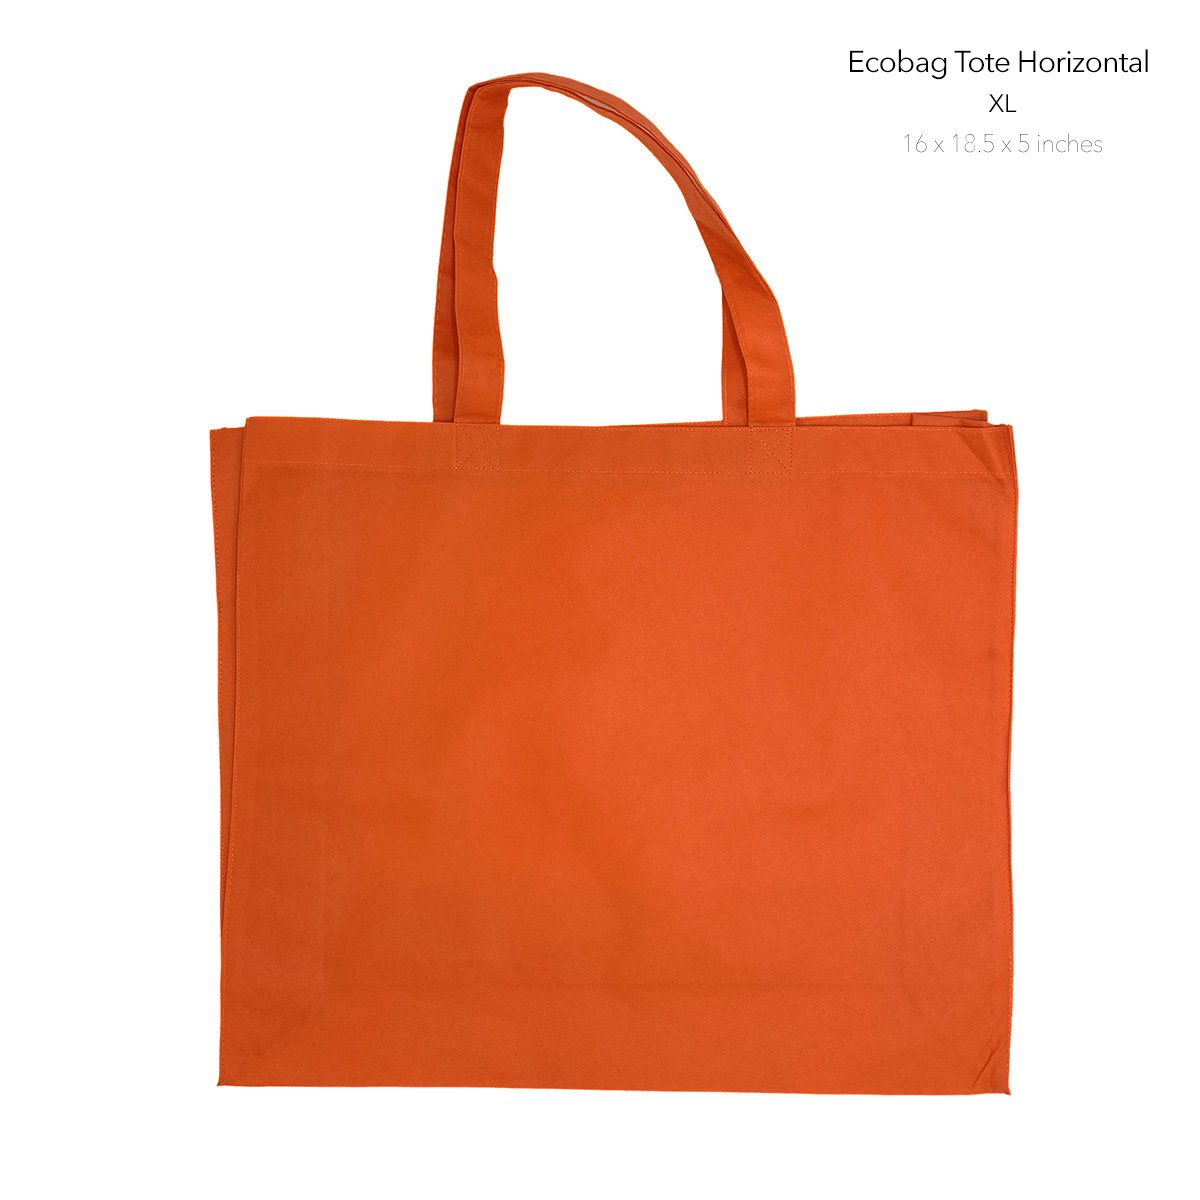 Canvas bags manufacturers and suppliers in Philippines